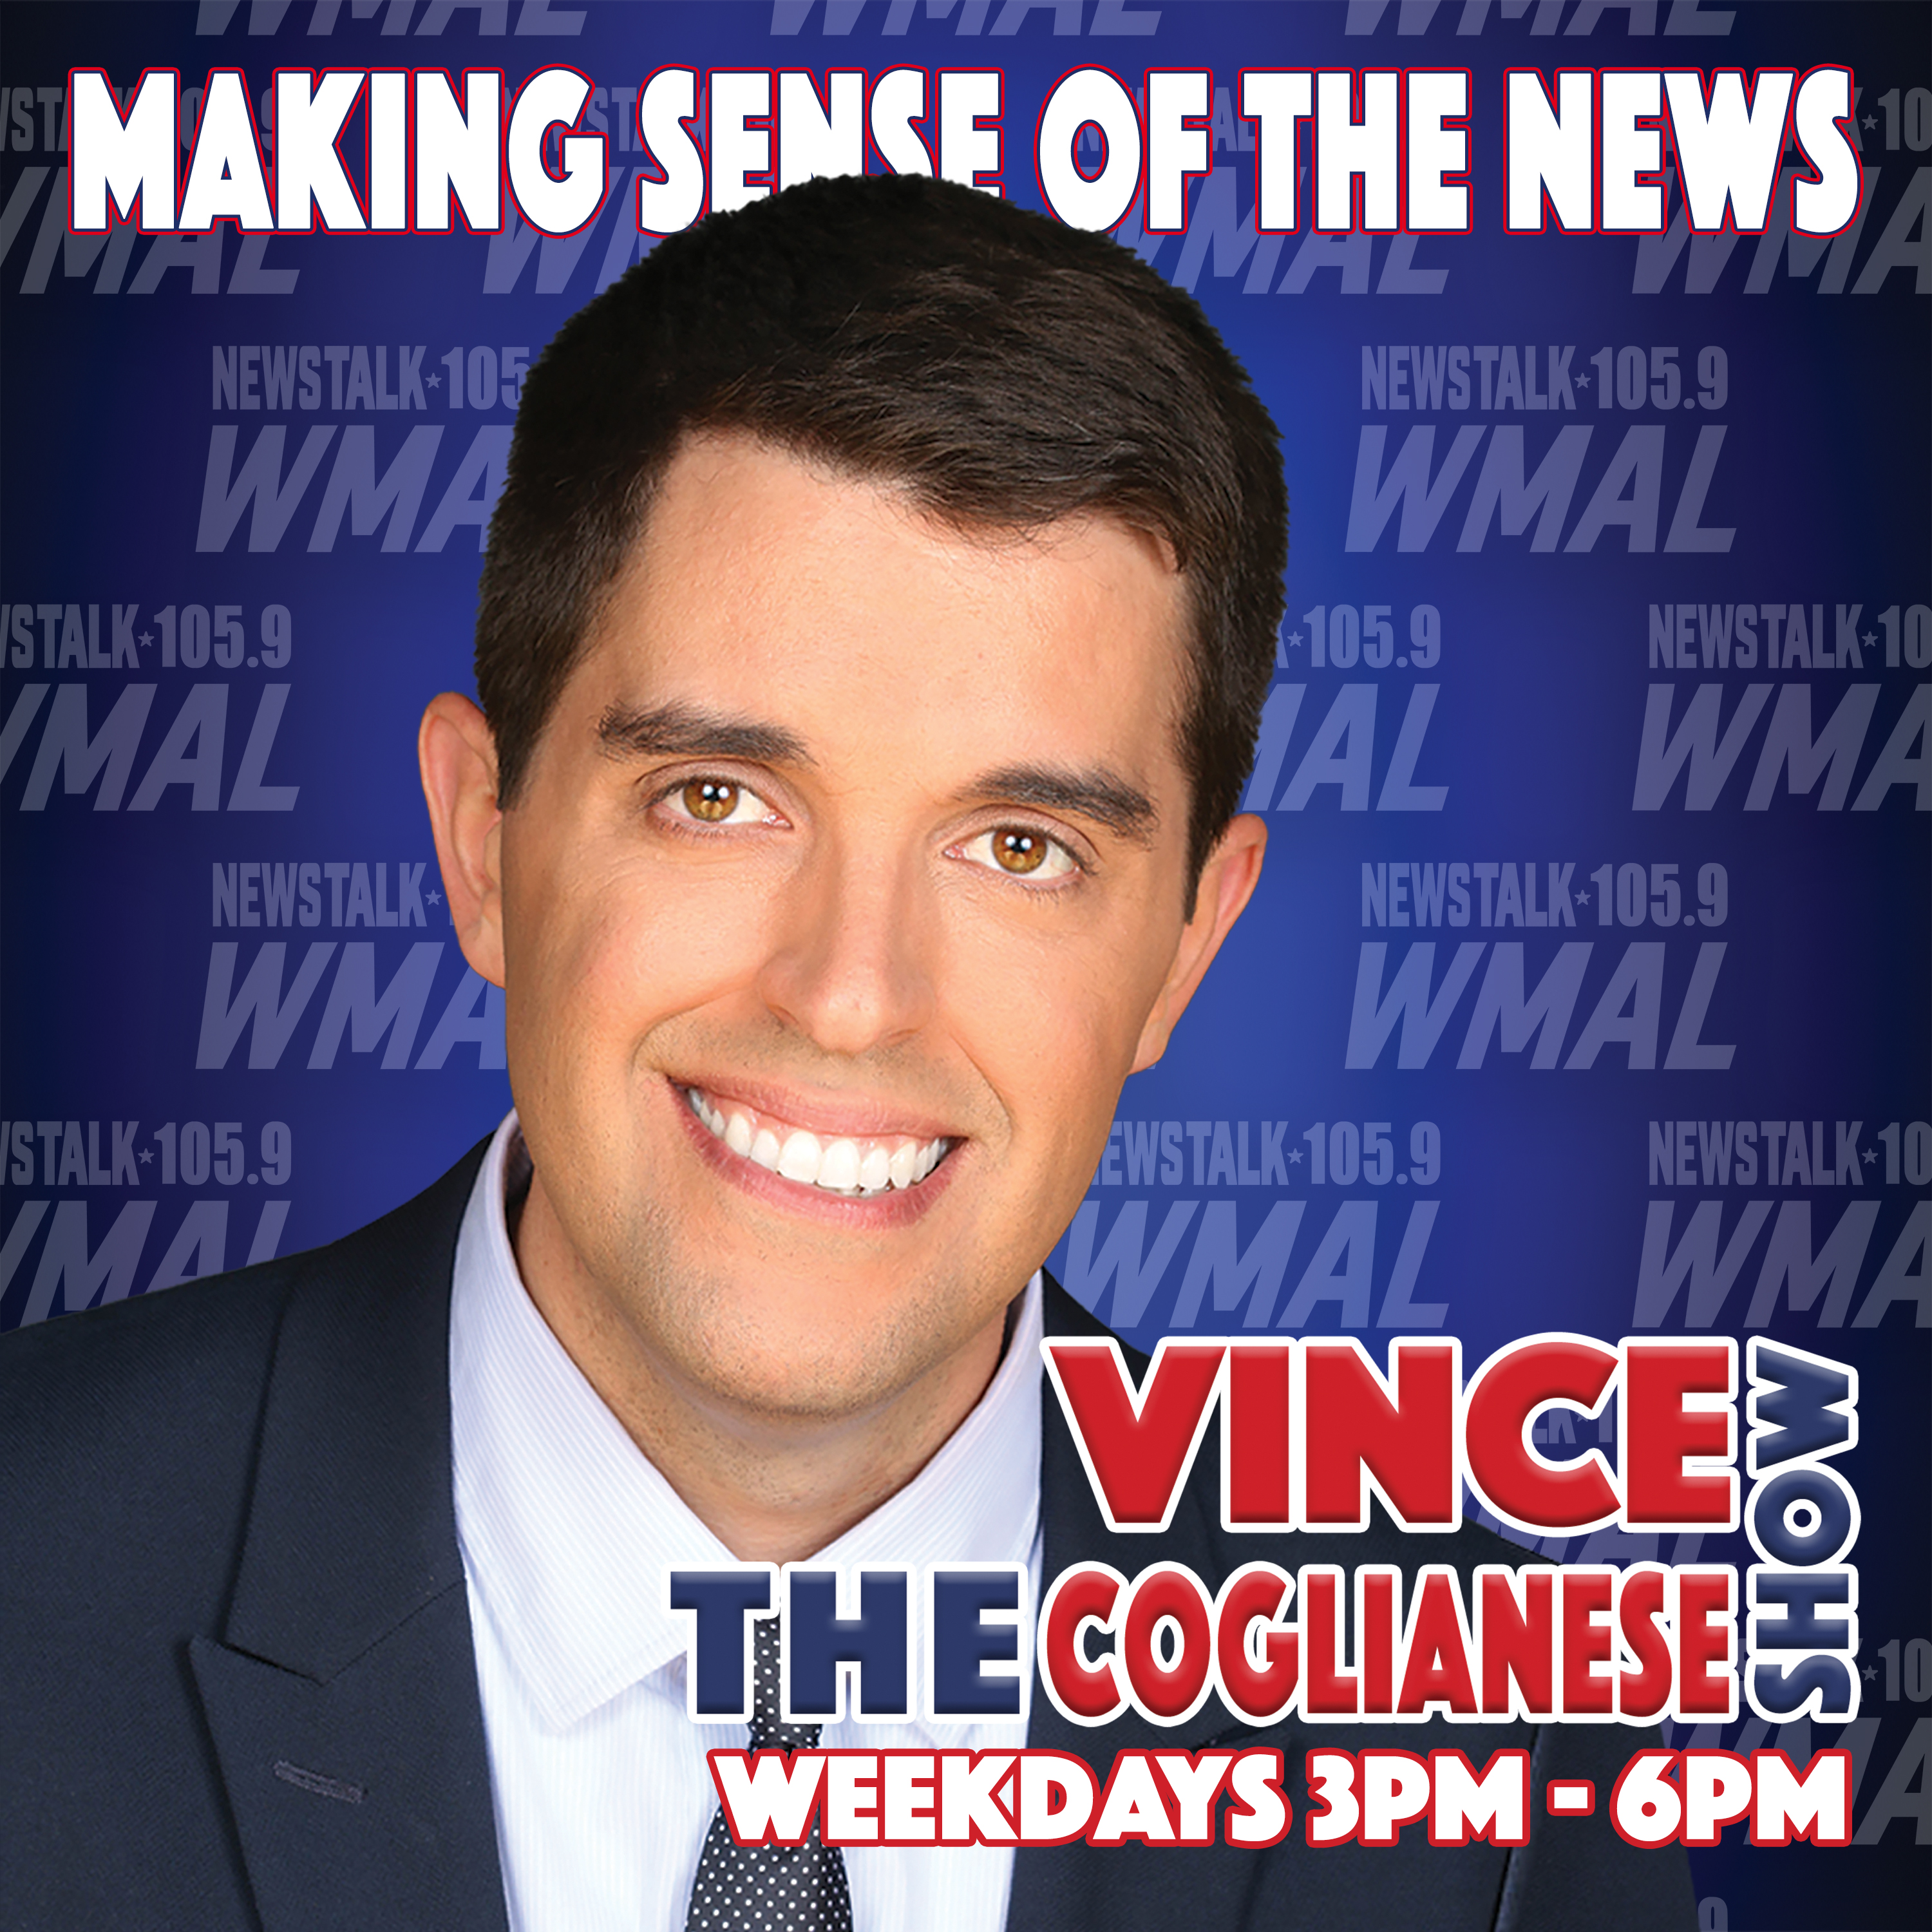 The Vince Coglianese Show - Rep. Andy Harris - 08.27.21